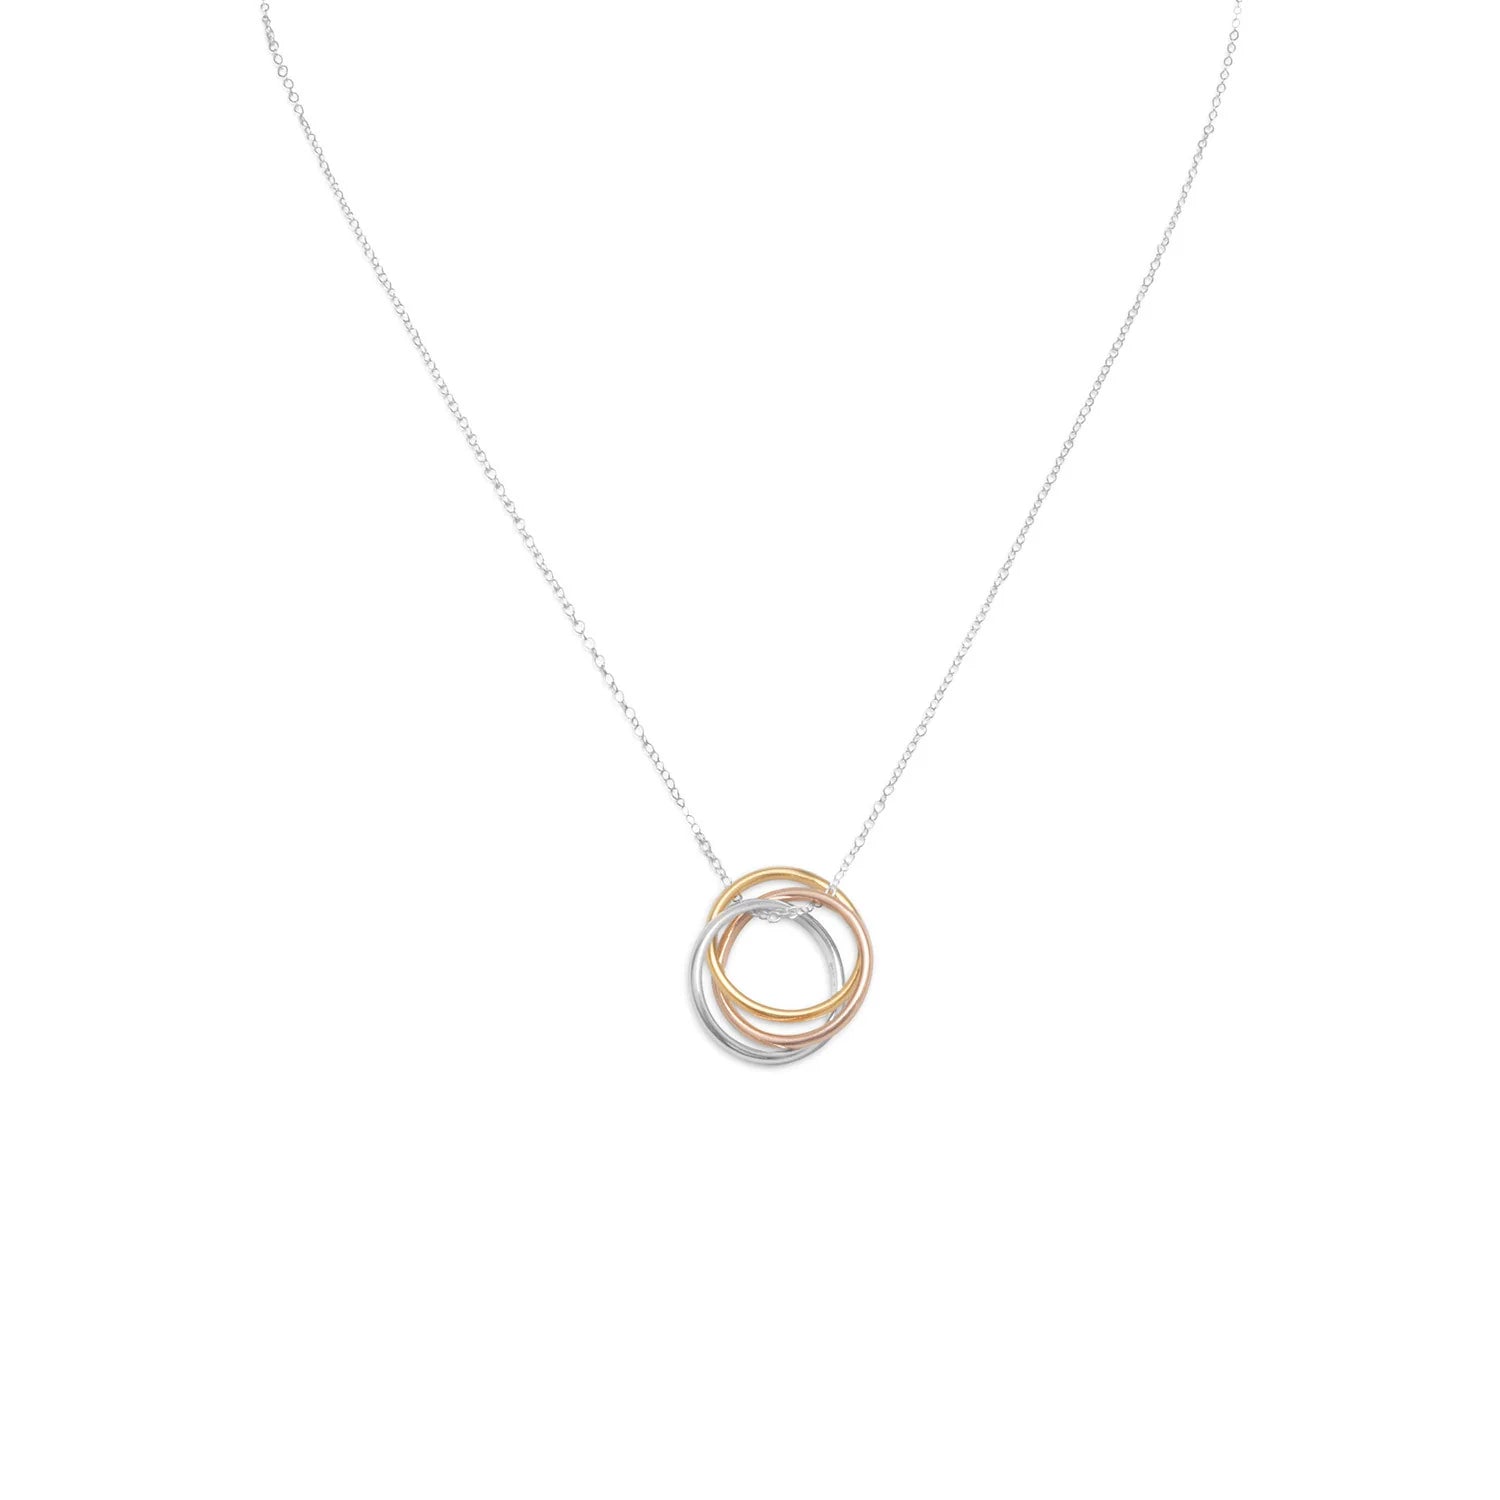 Sterling Silver Necklace with Tri Tone Rings- M H W ACCESSORIES - M H W ACCESSORIES LLC